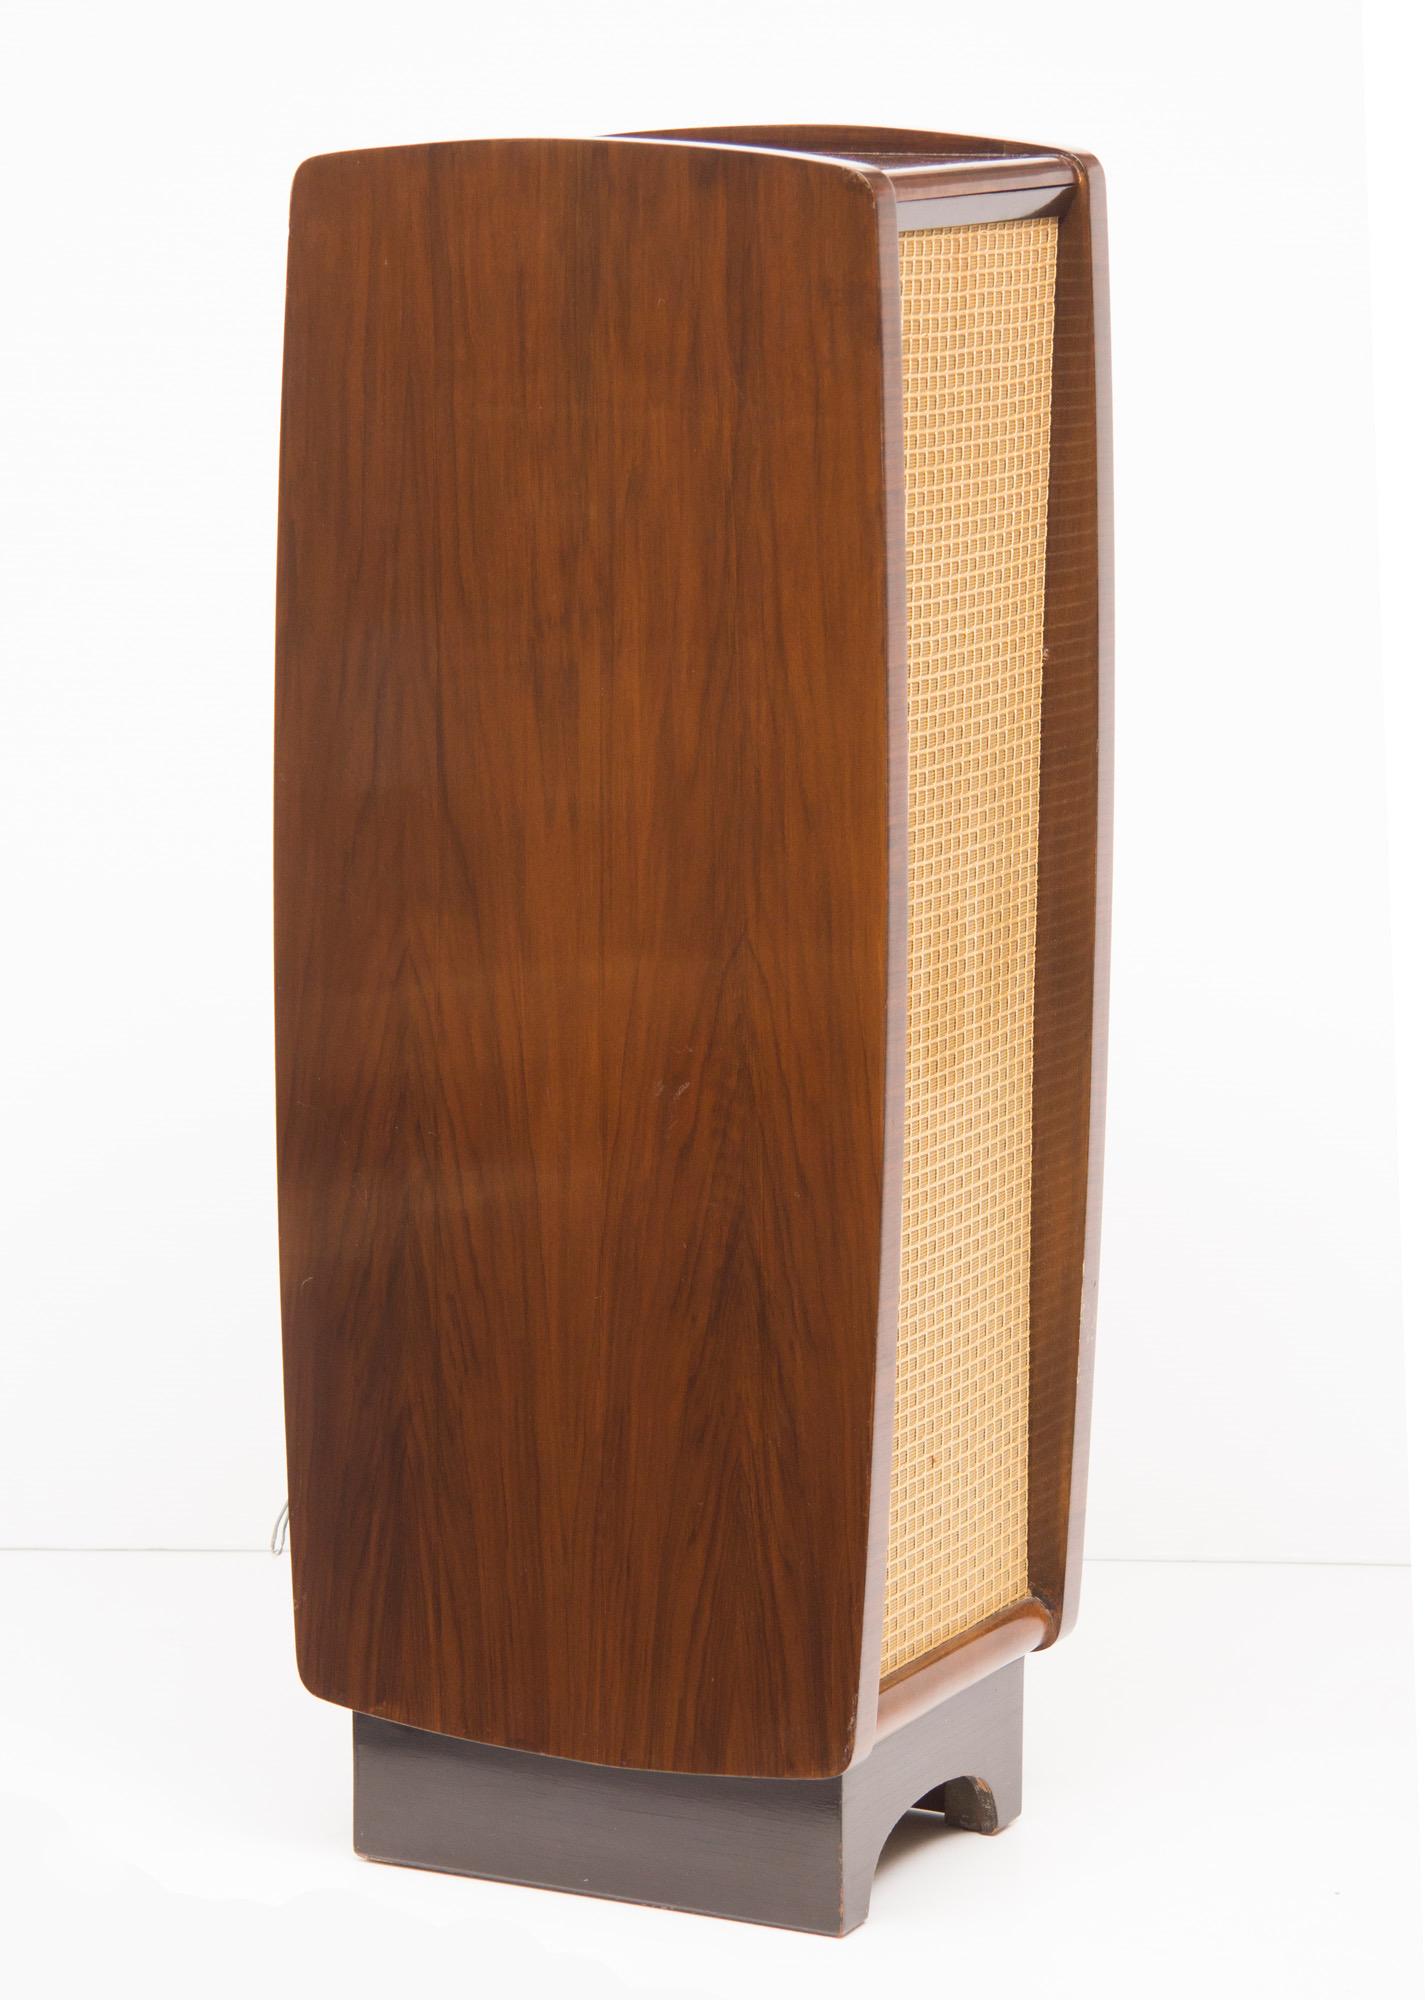 Mid-Century Modern Pair of Midcentury Model LS35 Loudspeakers by Celestion for His Masters Voice